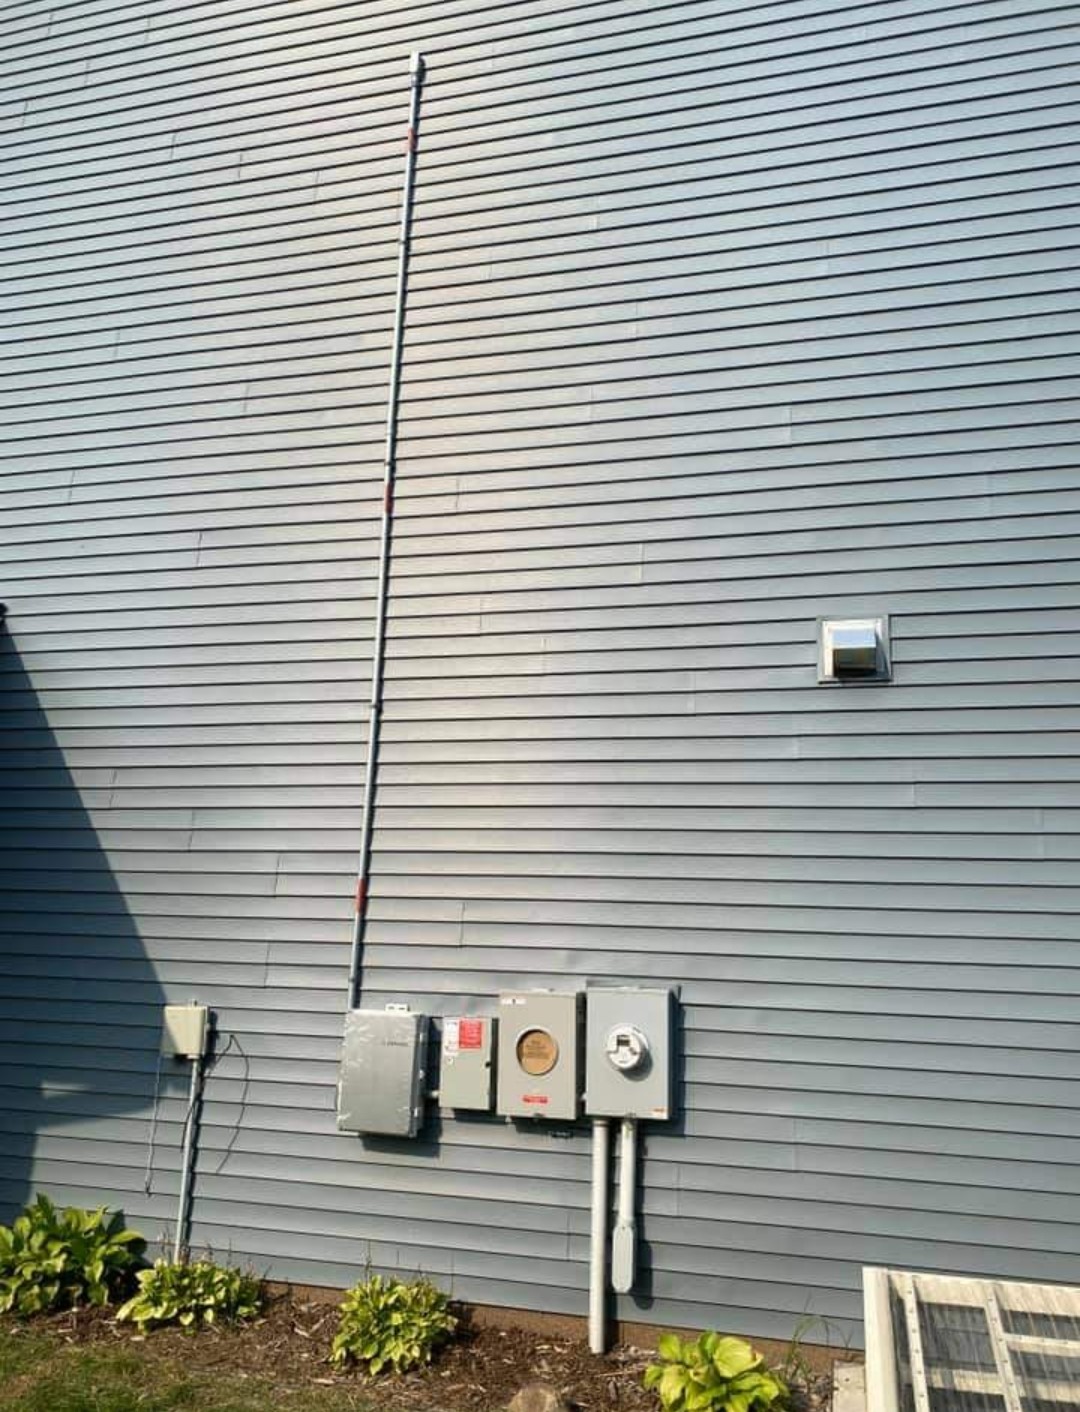 Electrical meters on the side of a building